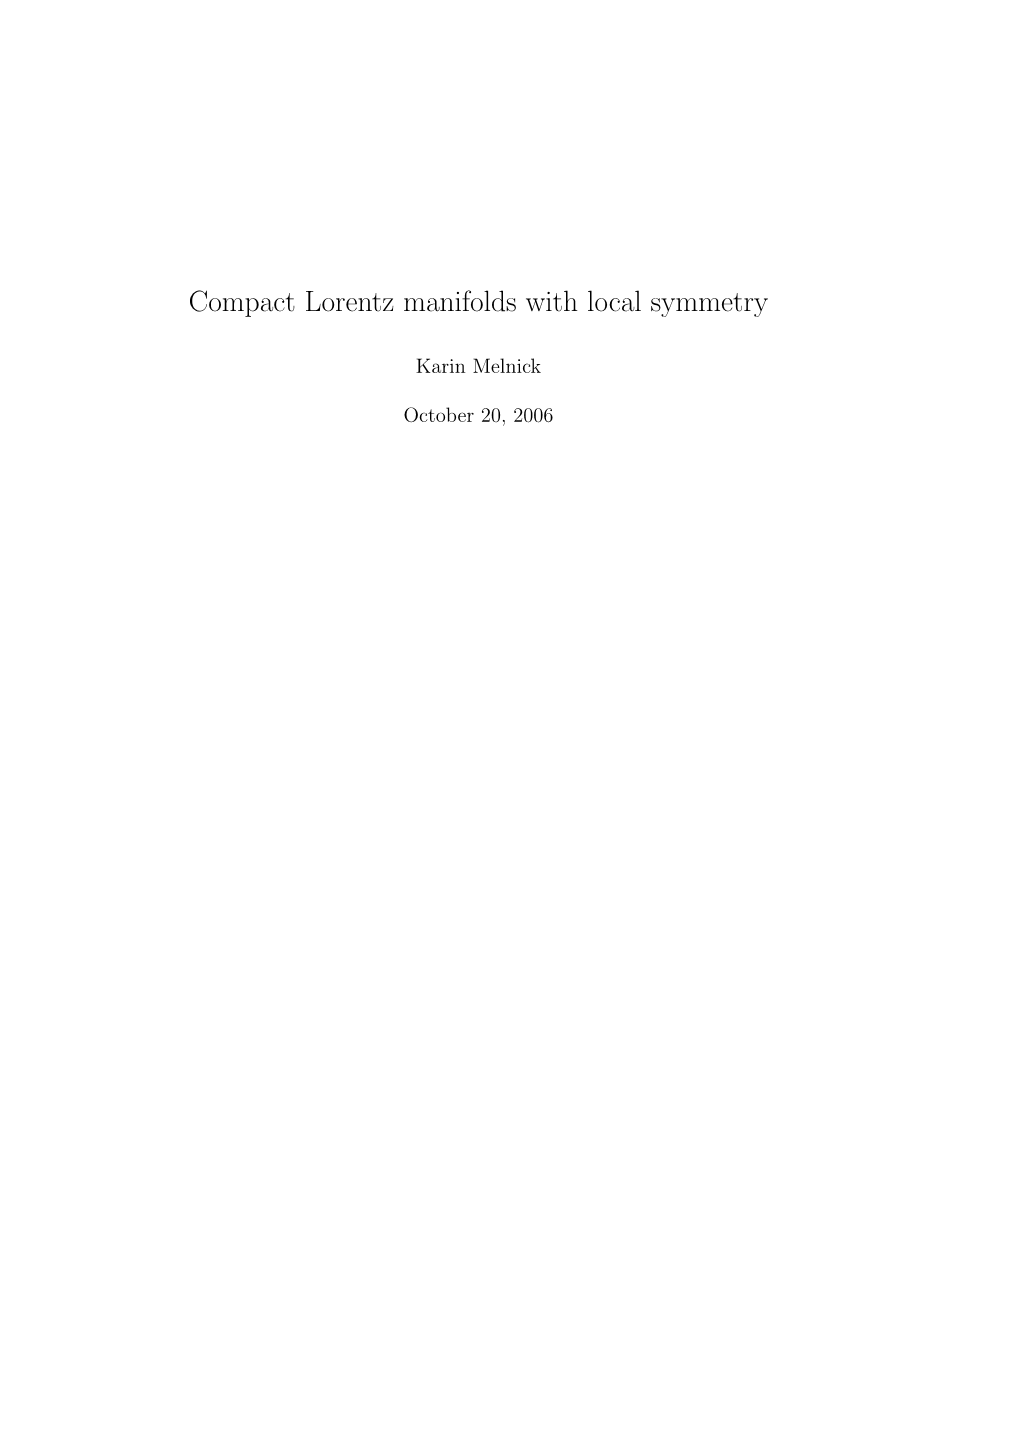 Compact Lorentz Manifolds with Local Symmetry